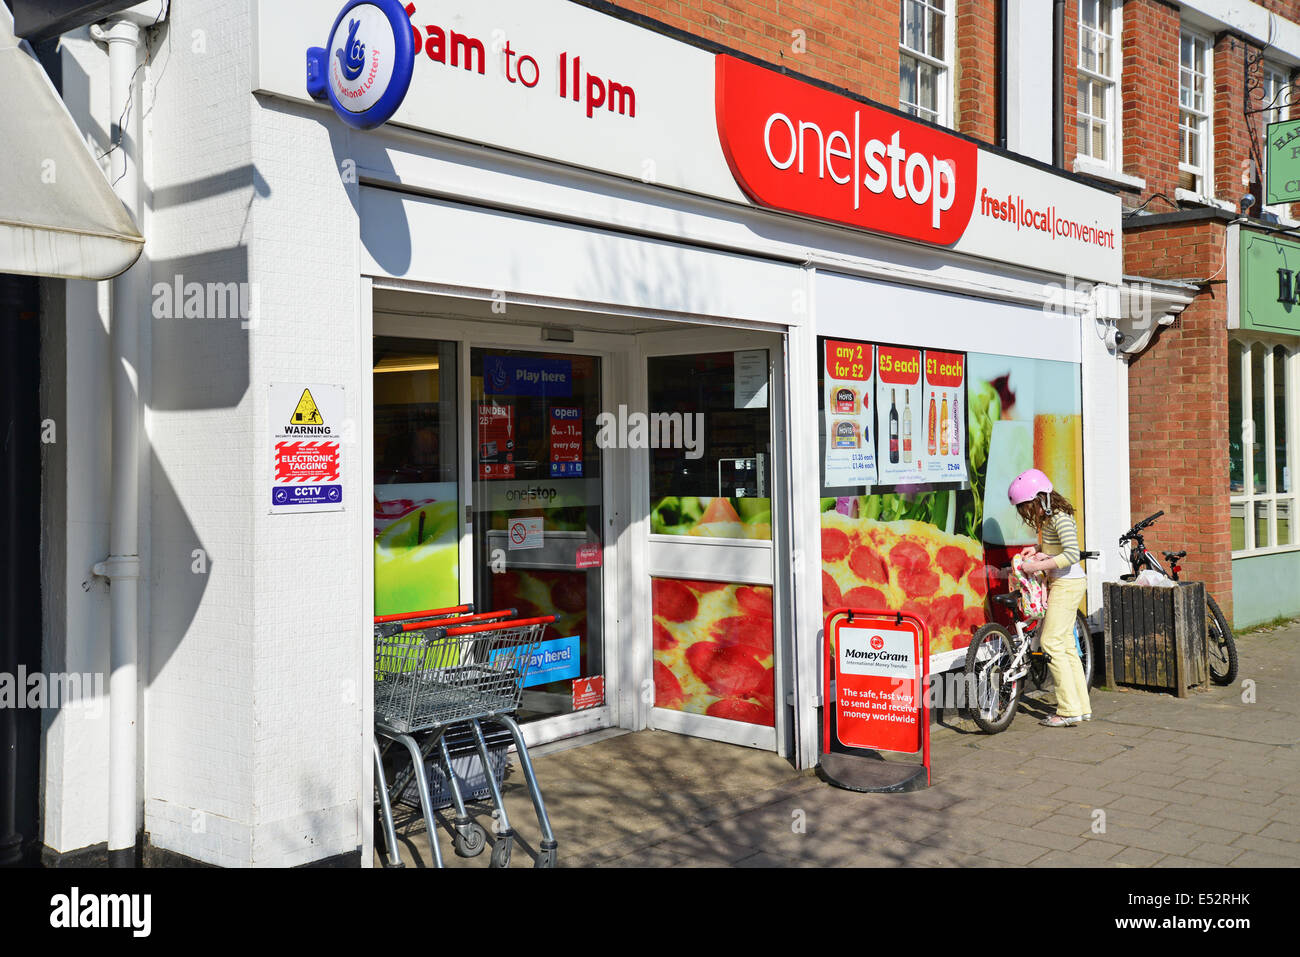 One Stop store, The High Street, Hartley Wintney, Hampshire, England ...